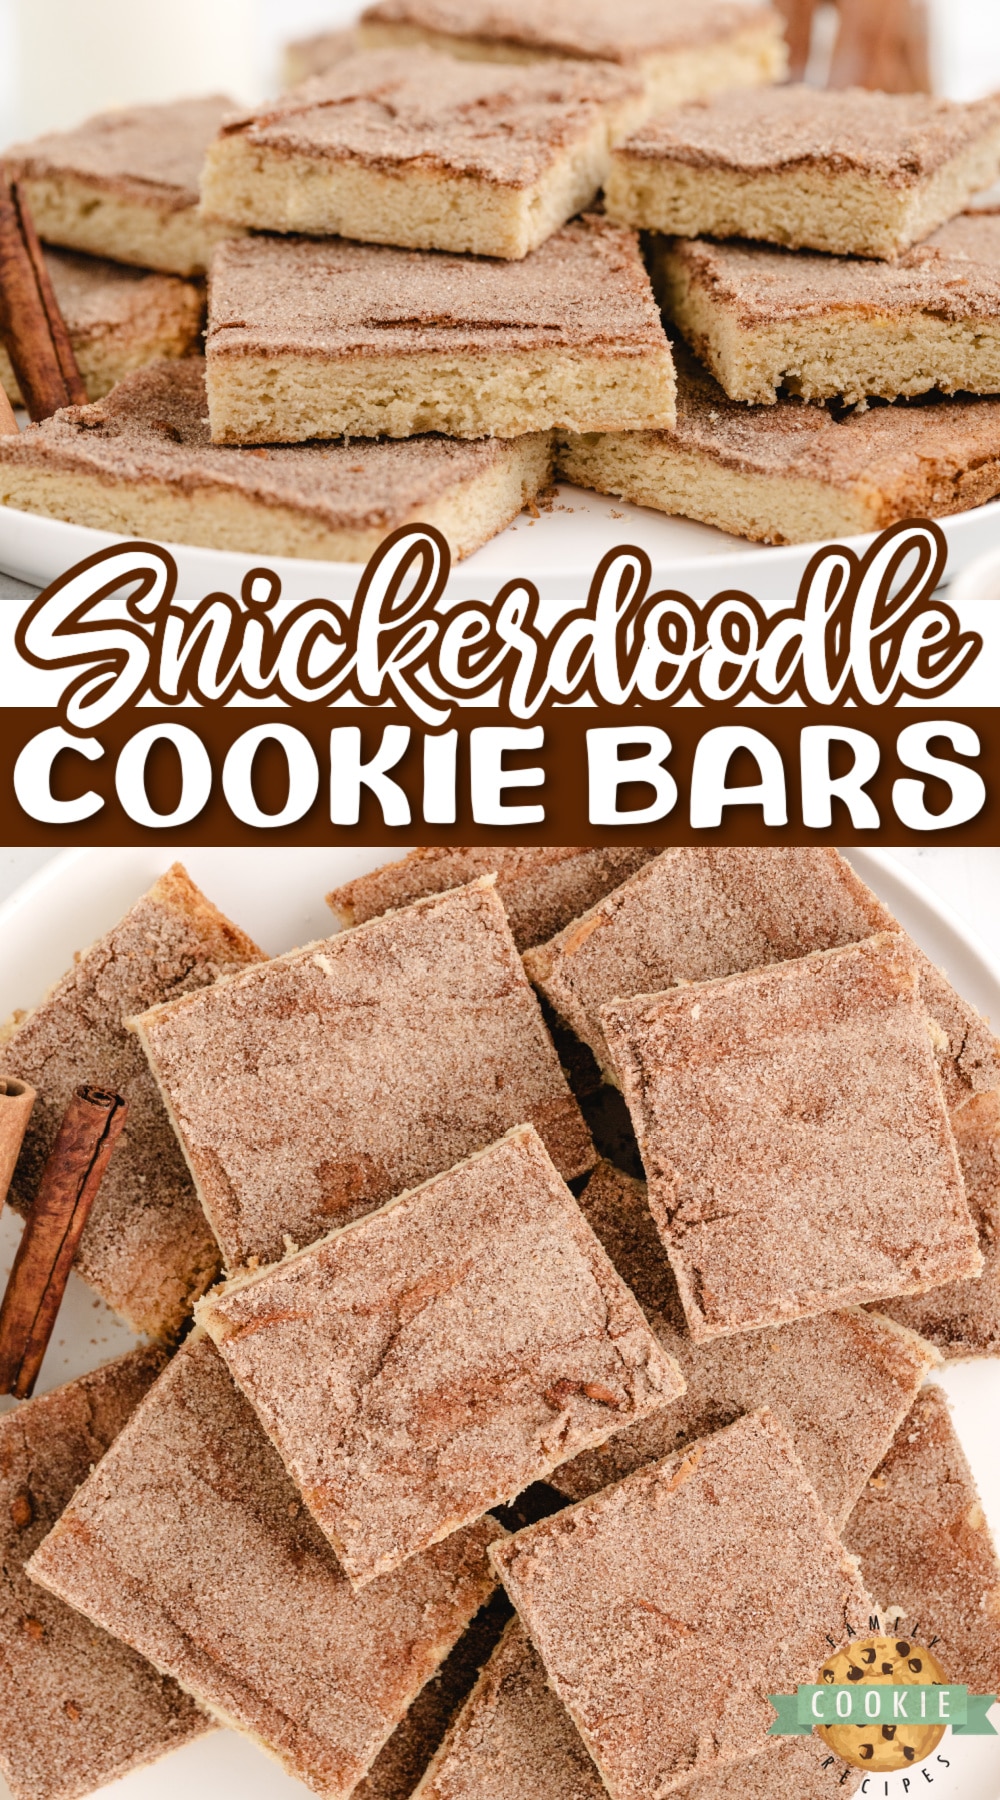 Snickerdoodle Cookie Bars are soft, delicious, and packed with that cinnamon flavor we all love! This simple Snickerdoodle recipe is made in a sheet pan and can be easily sliced and served.